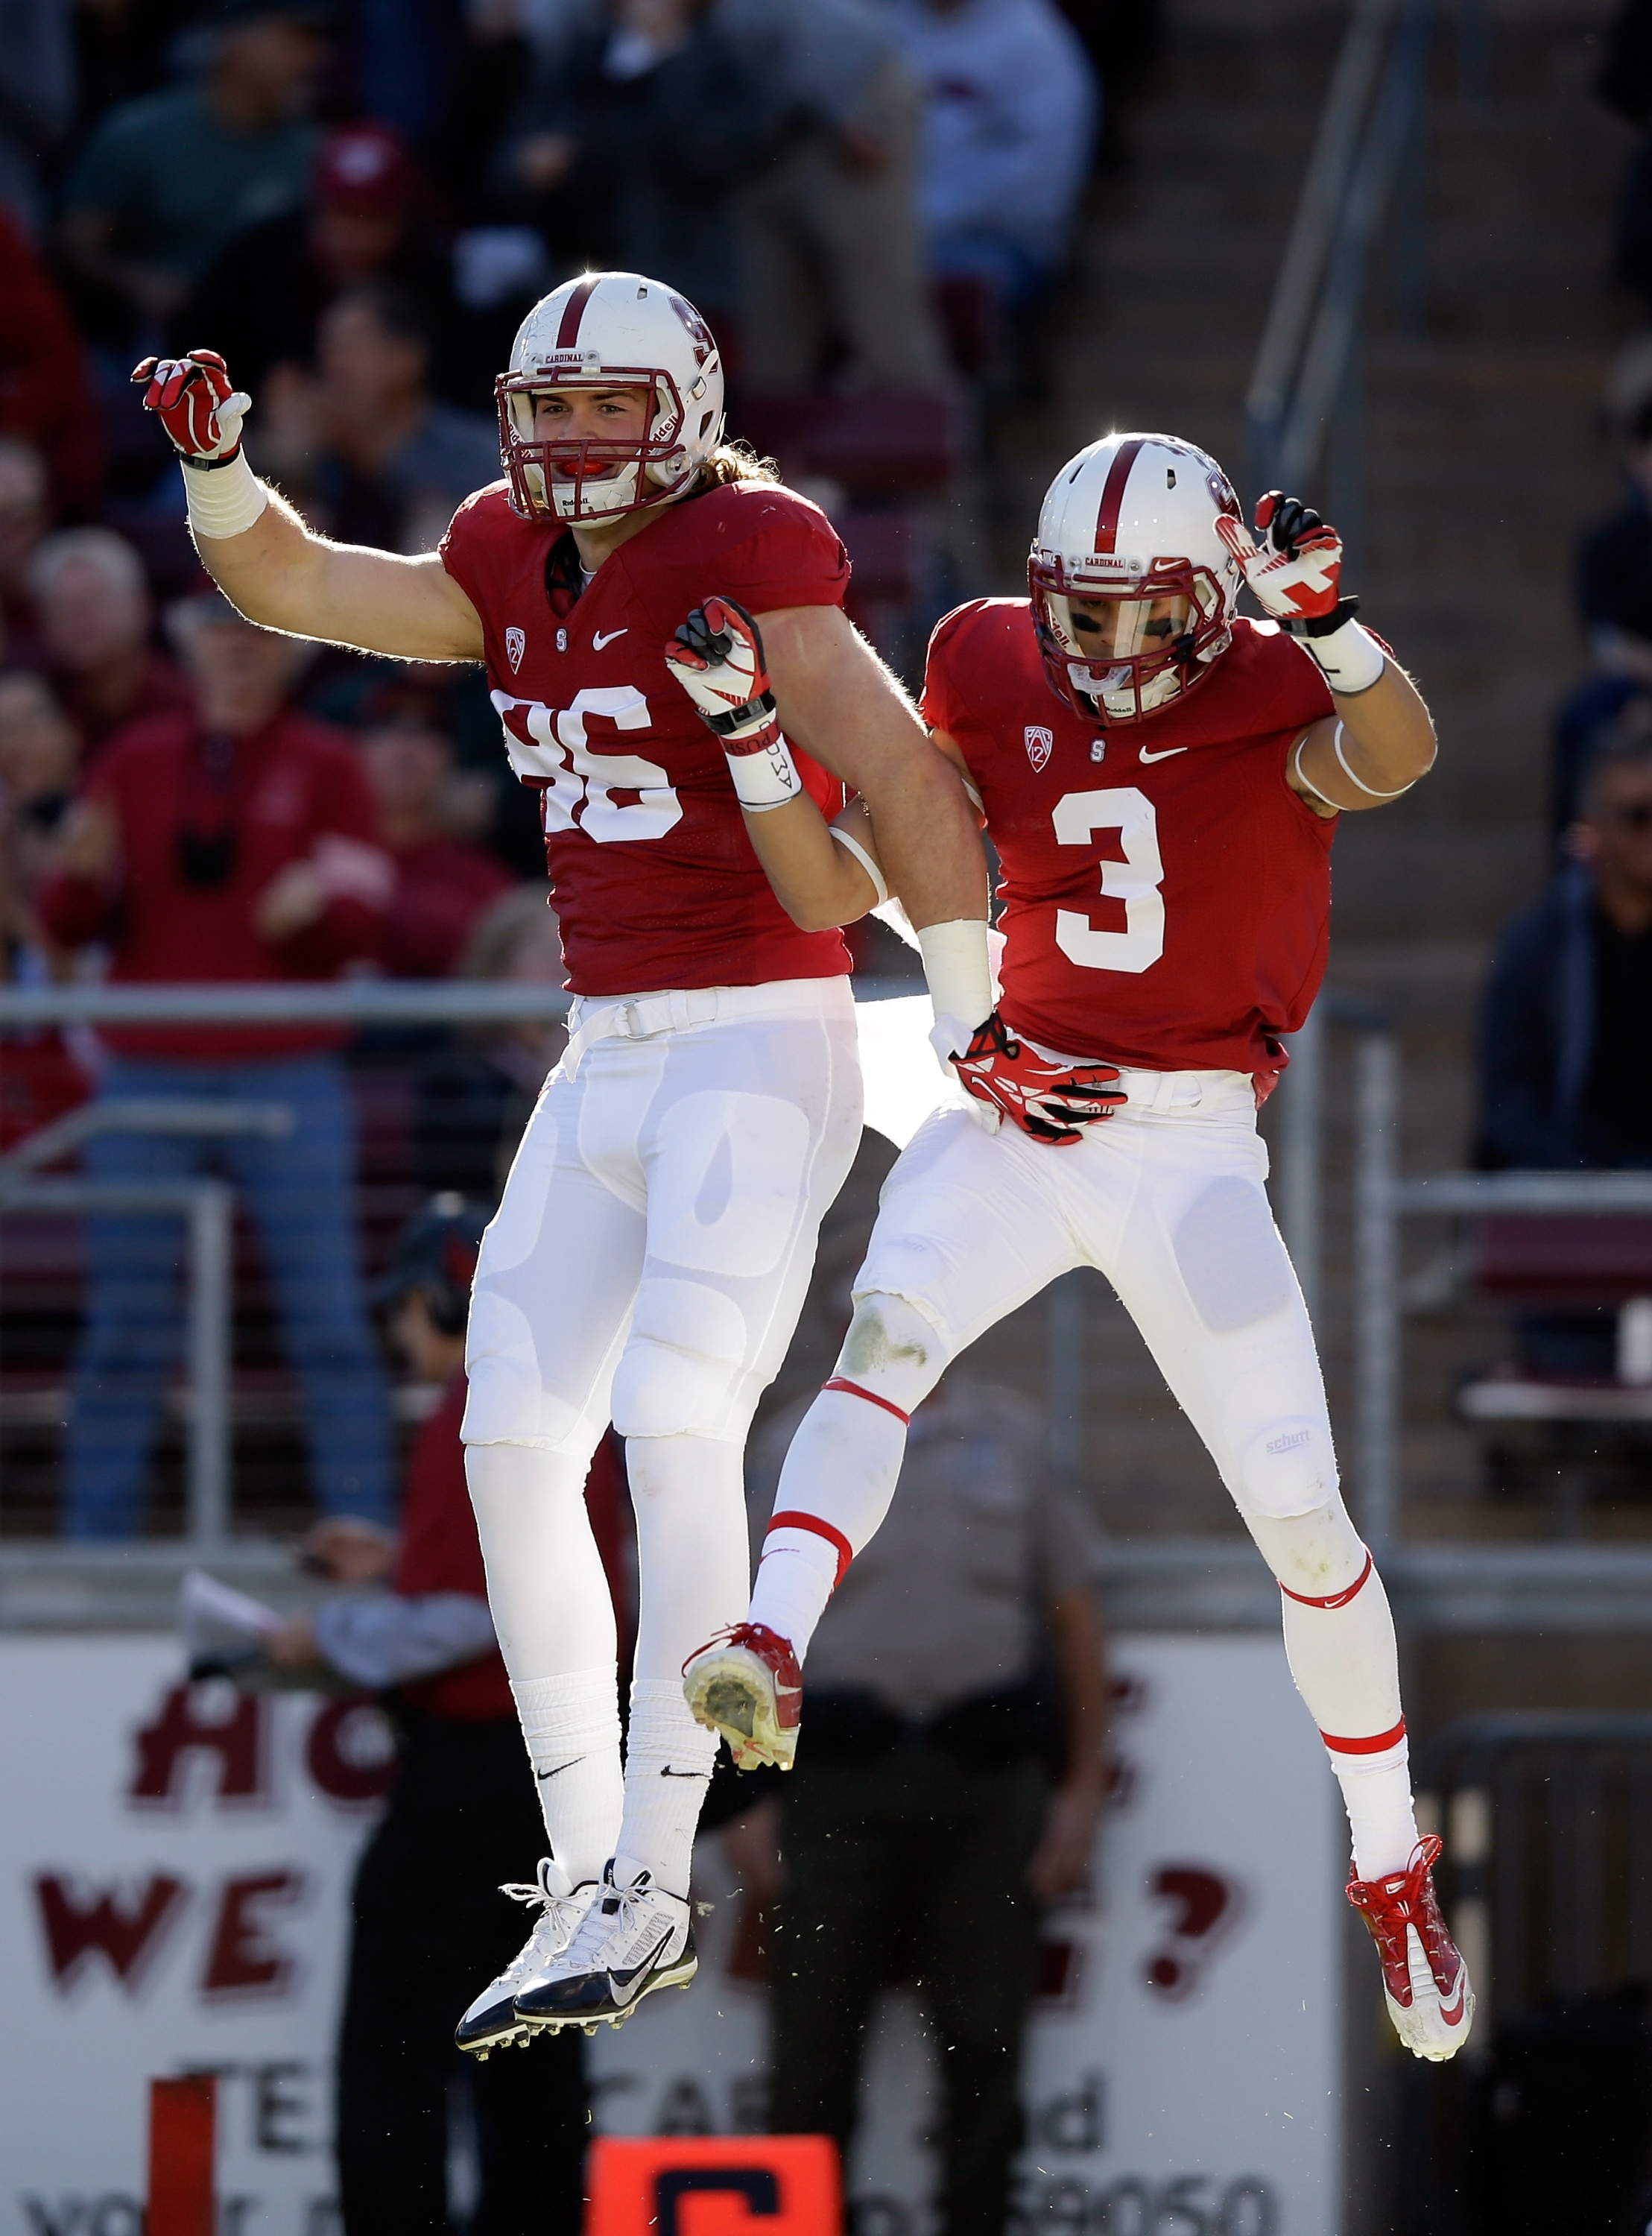 PALO ALTO, CA - NOVEMBER 23: Charlie Hopkins #86 congratulates Michael Rector #3 of the Stanford Cardinal after he scored a touchdown against the California Golden Bears at Stanford Stadium on November 23, 2013 in Palo Alto, California. (Photo by Ezra Shaw/Getty Images)